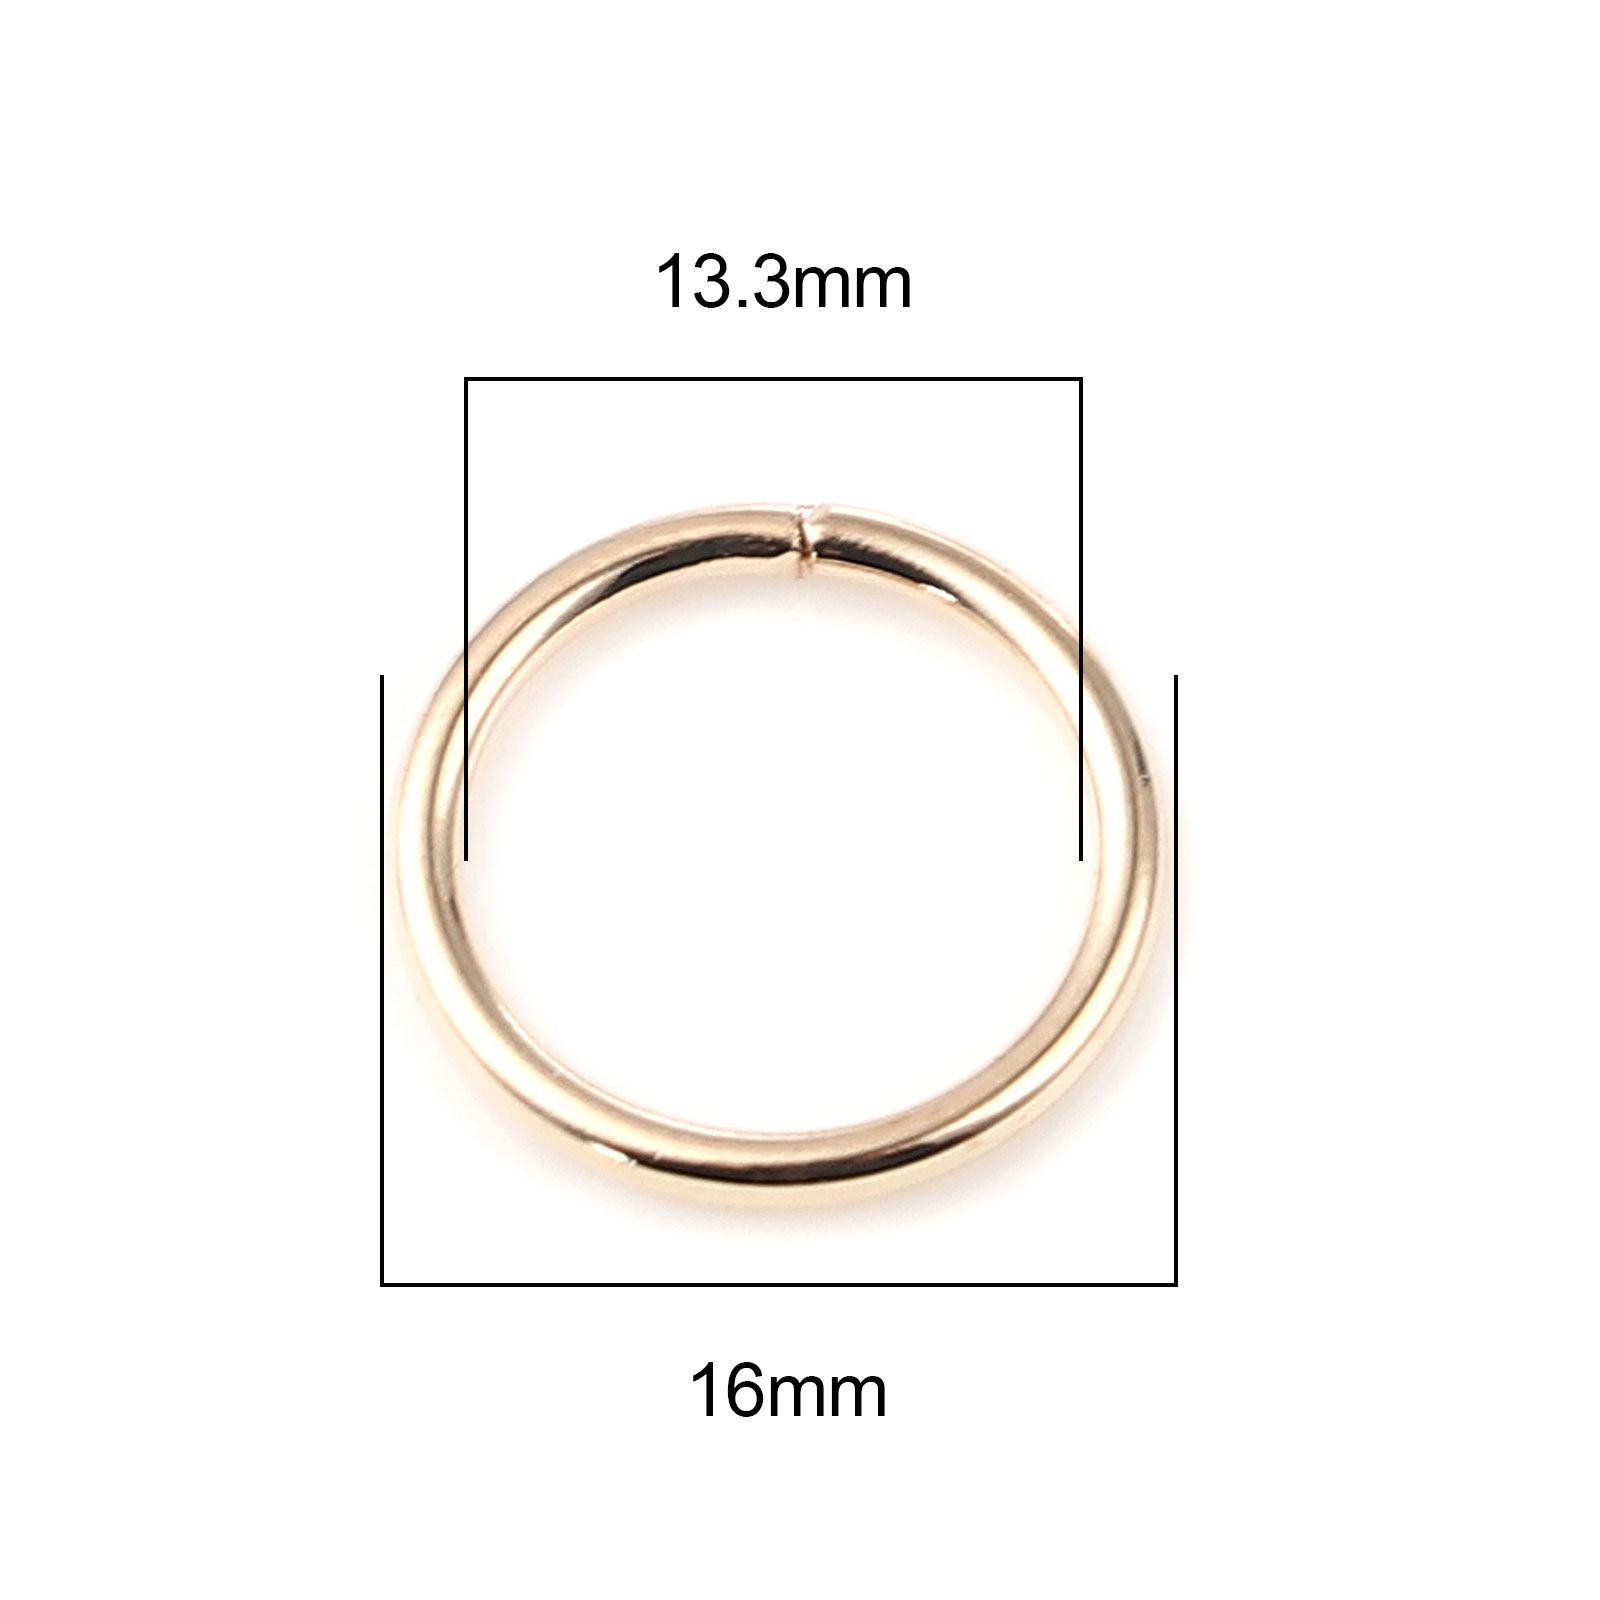 Picture of 1.5mm Iron Based Alloy Open Jump Rings Findings Circle Ring KC Gold Plated 16mm Dia, 200 PCs